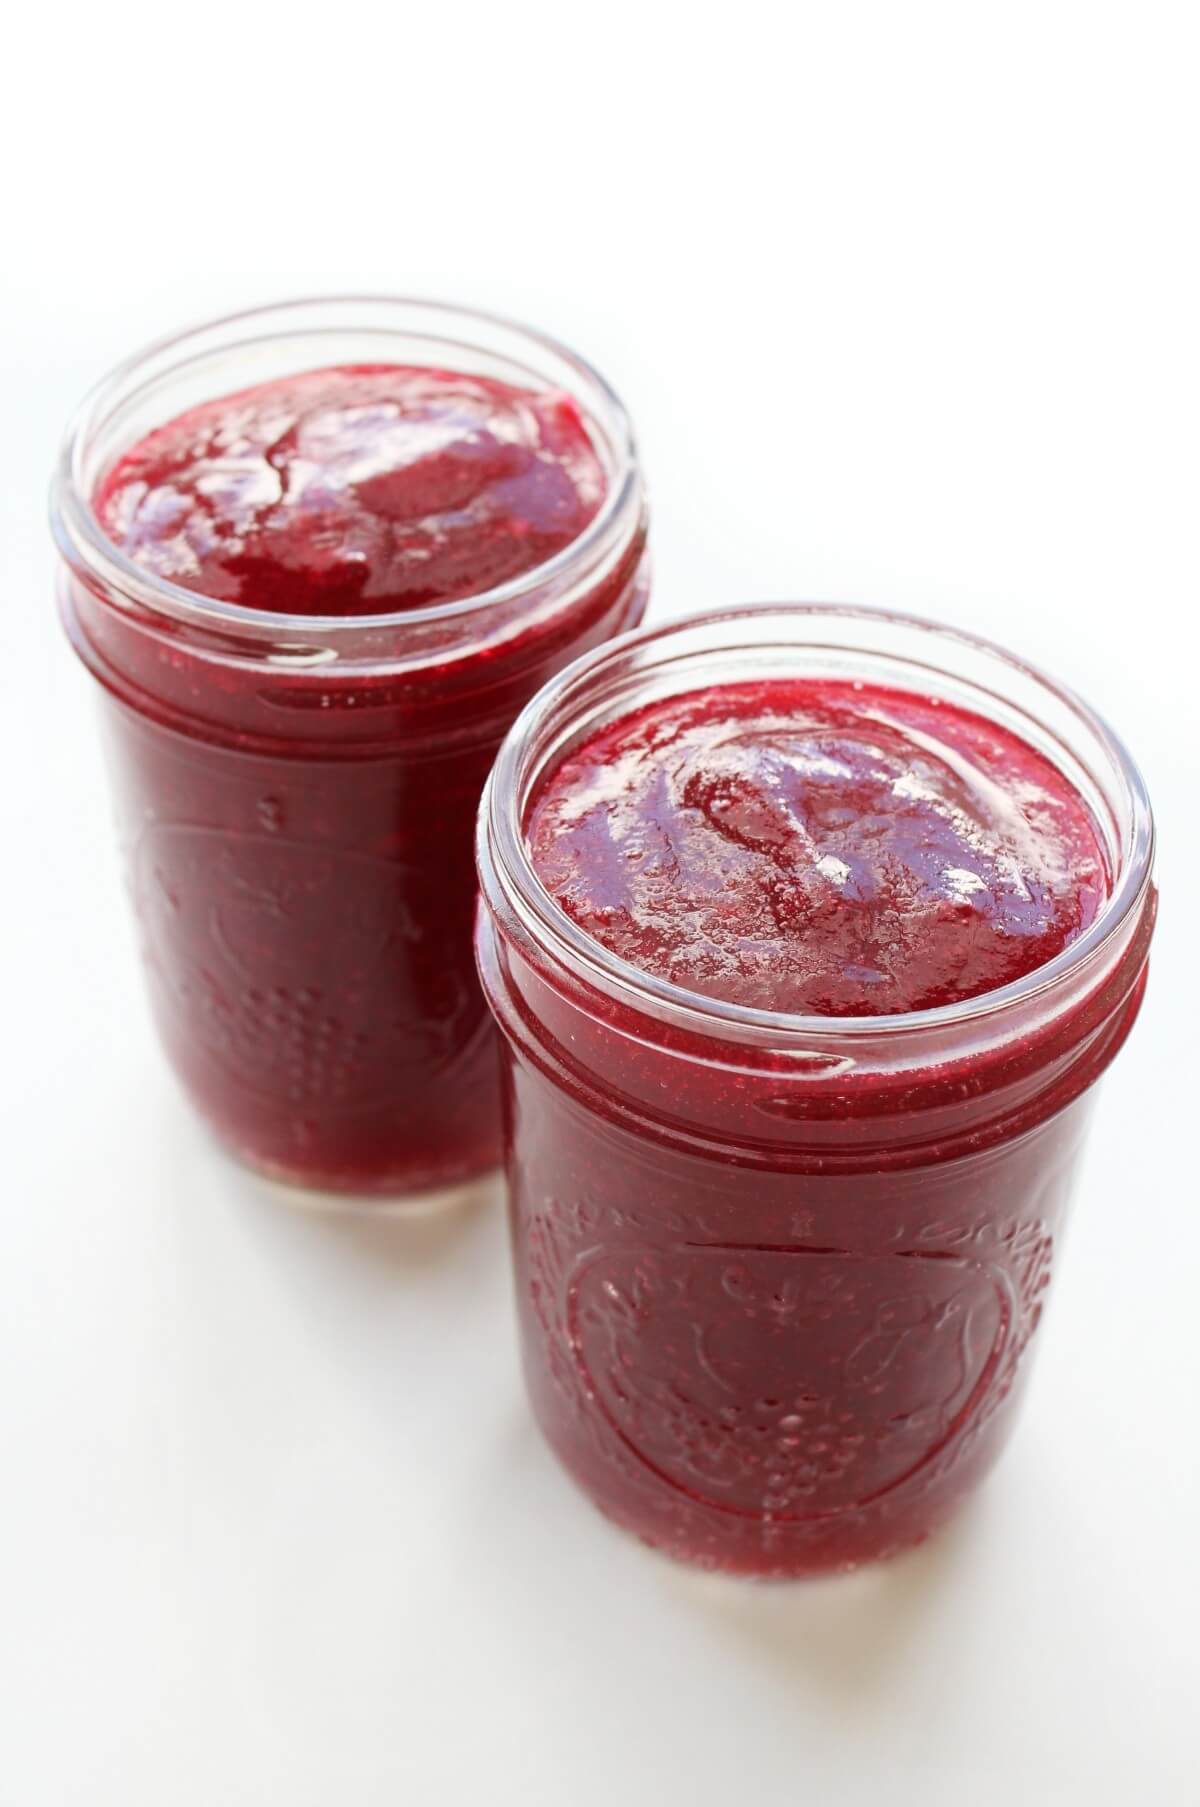 two glass jars with jellied cranberry sauce